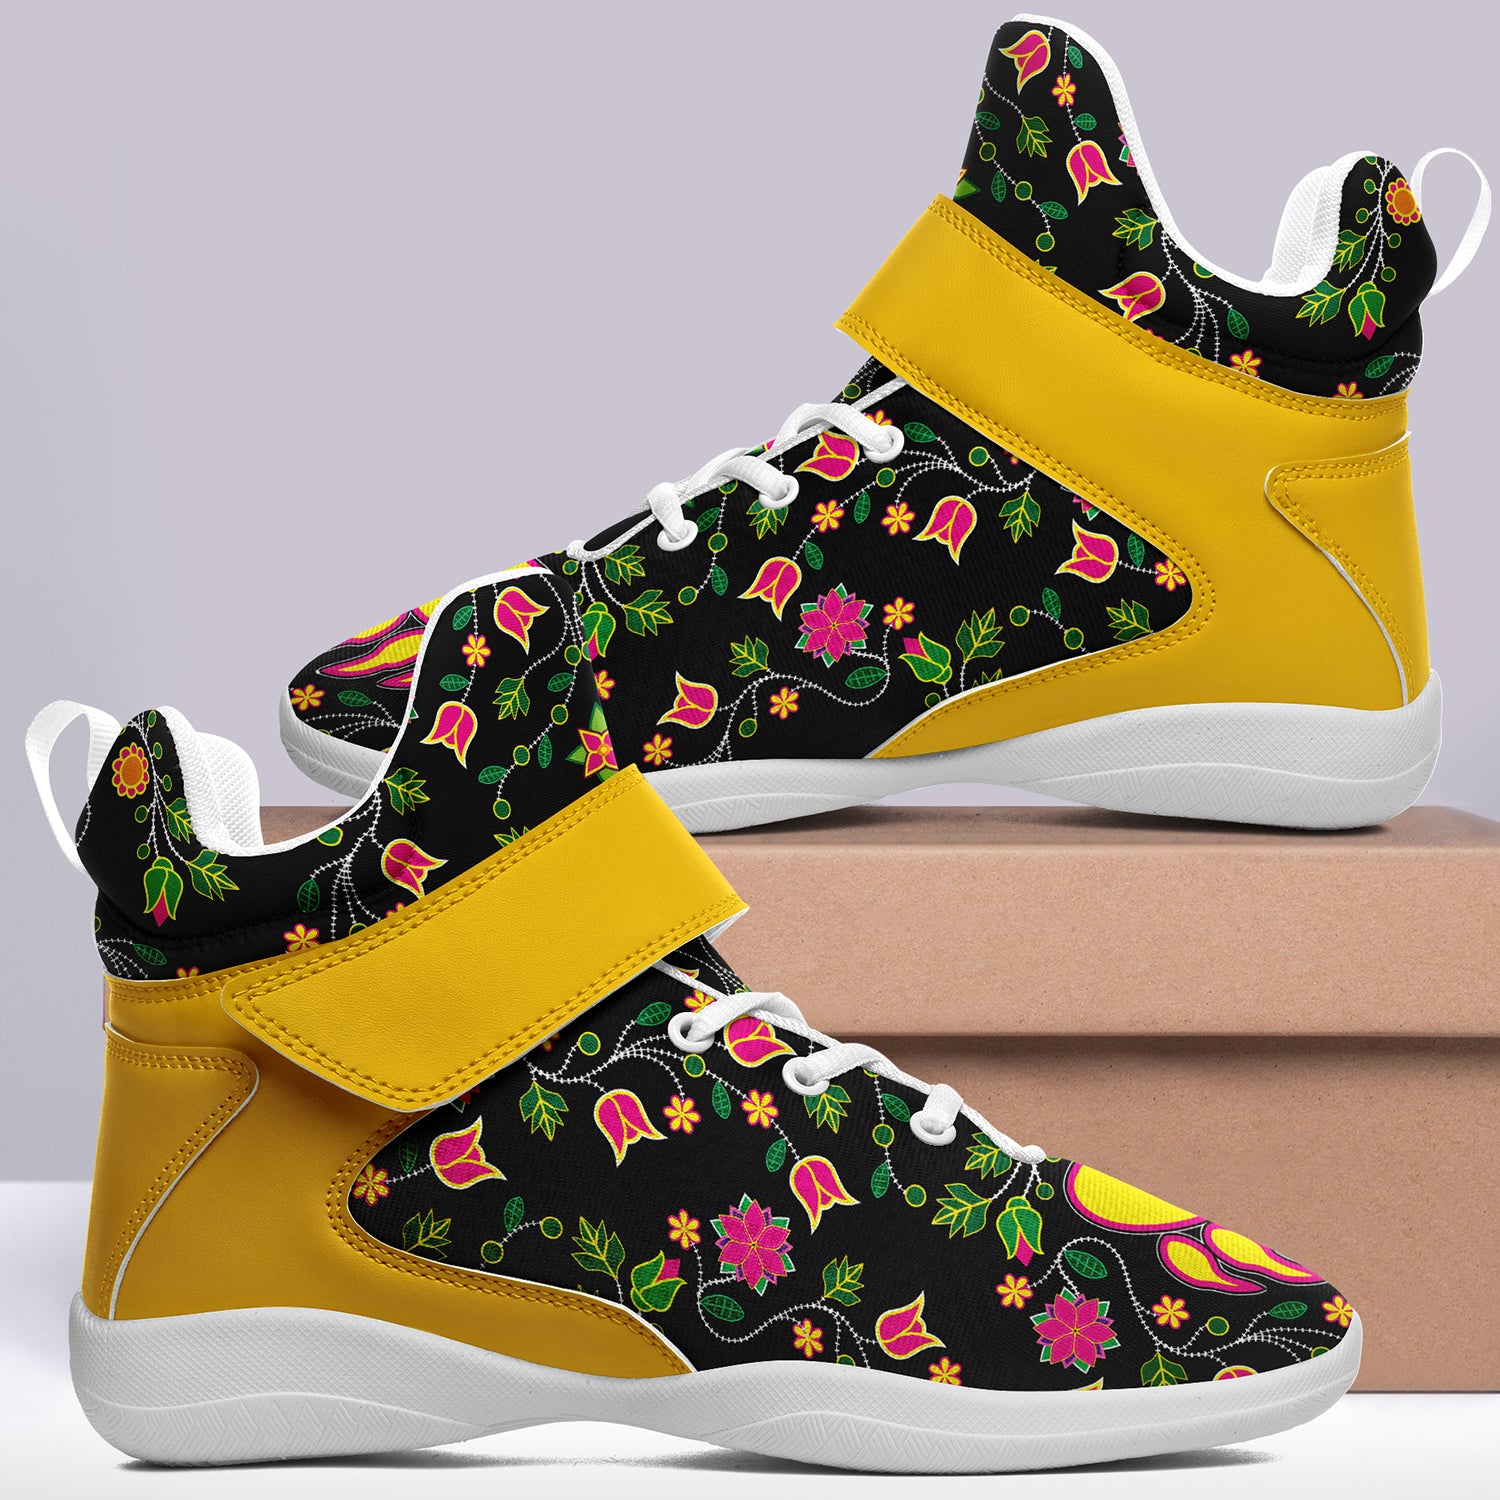 Floral Bearpaw Kid's Ipottaa Basketball / Sport High Top Shoes